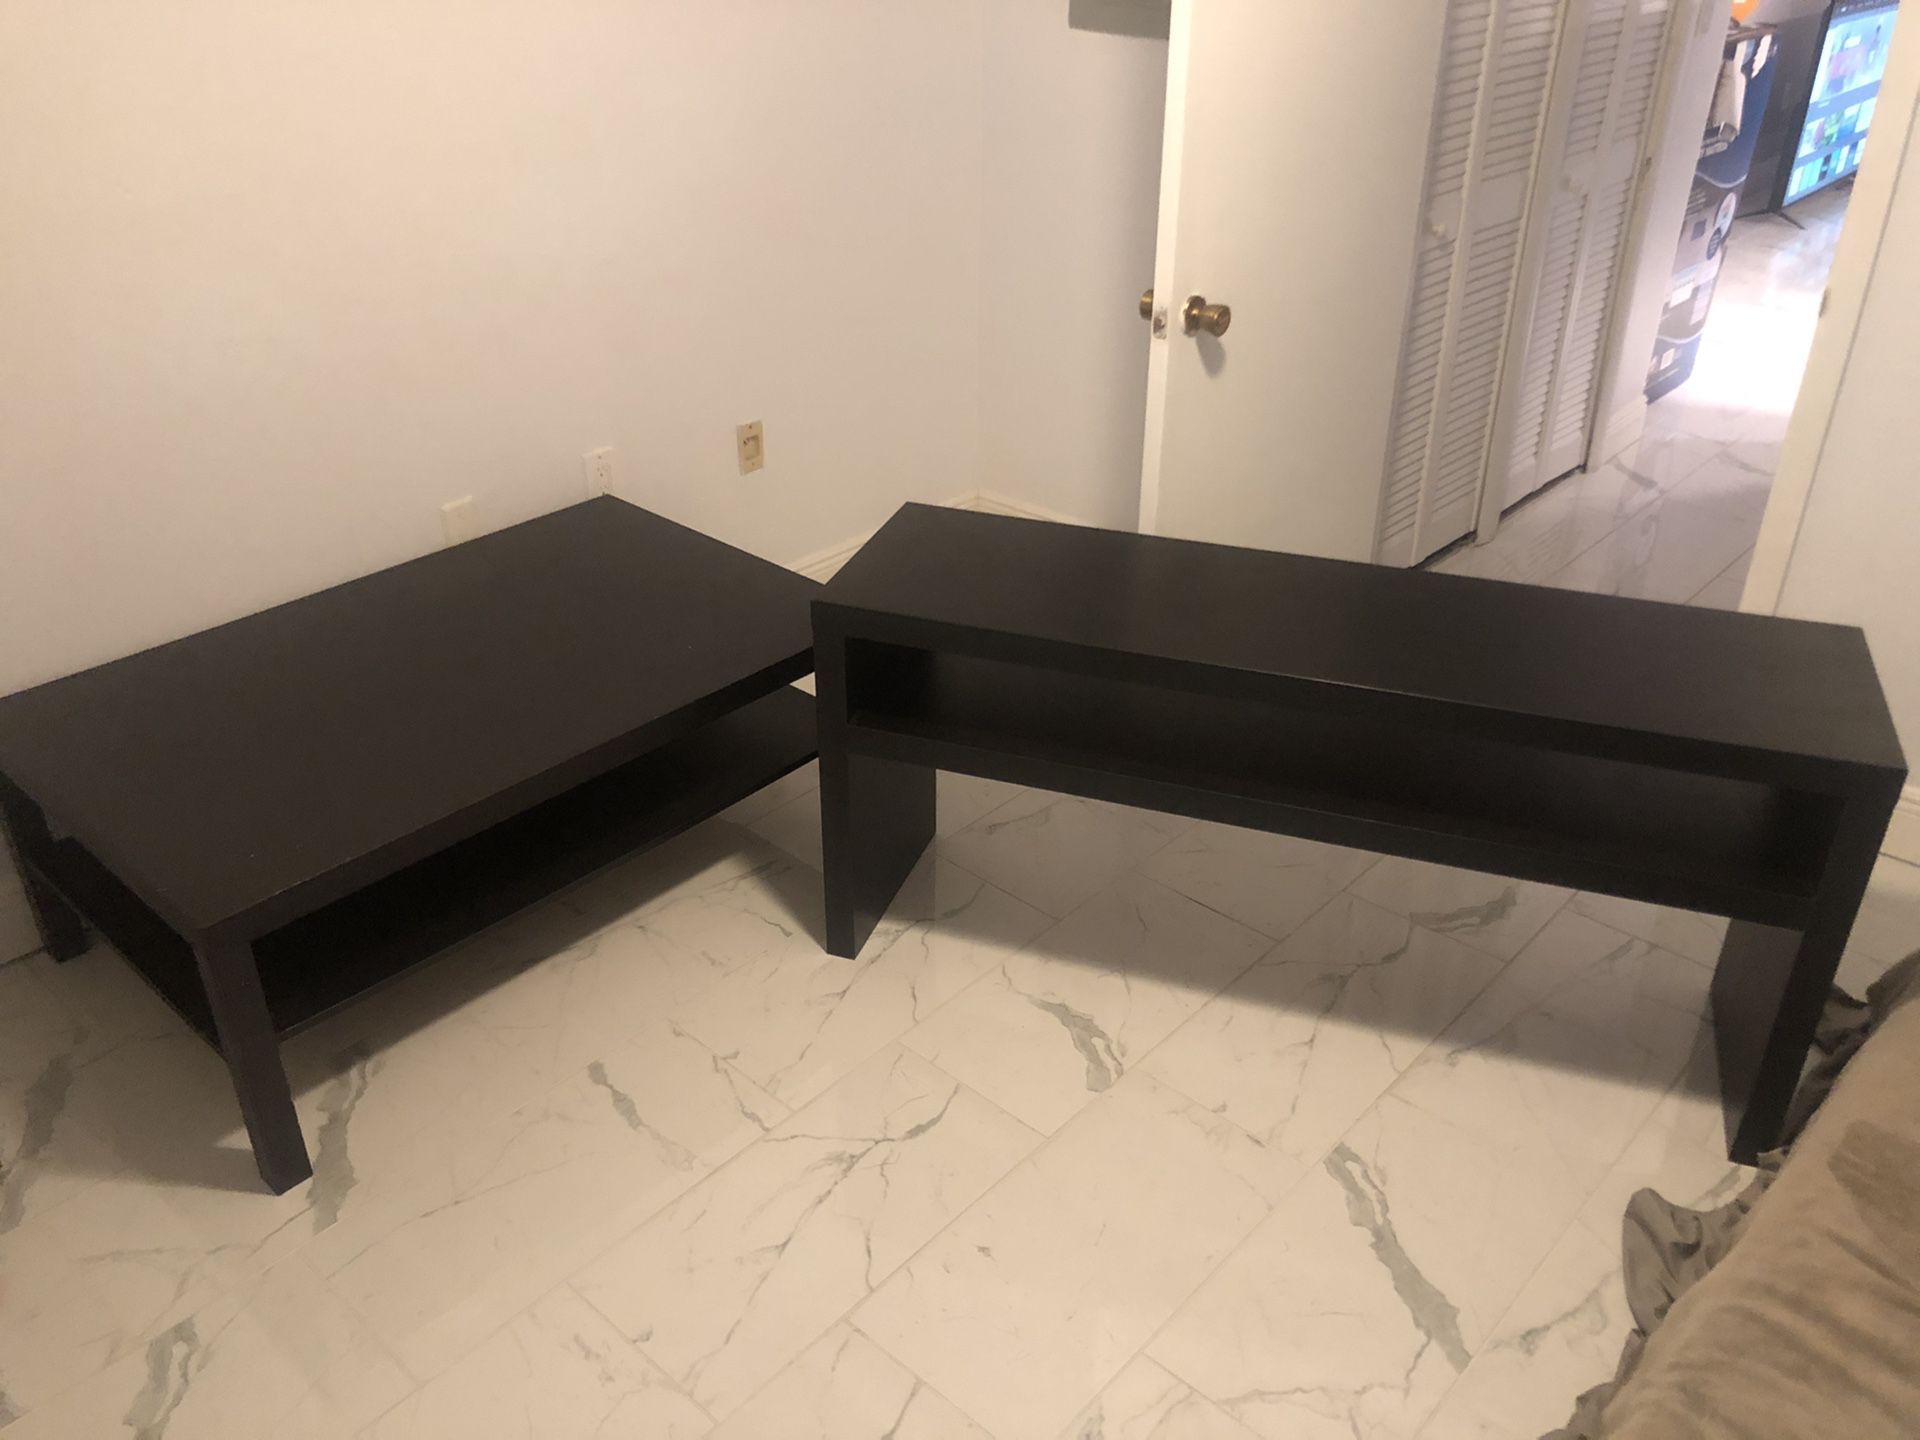 Coffee table and tv stand